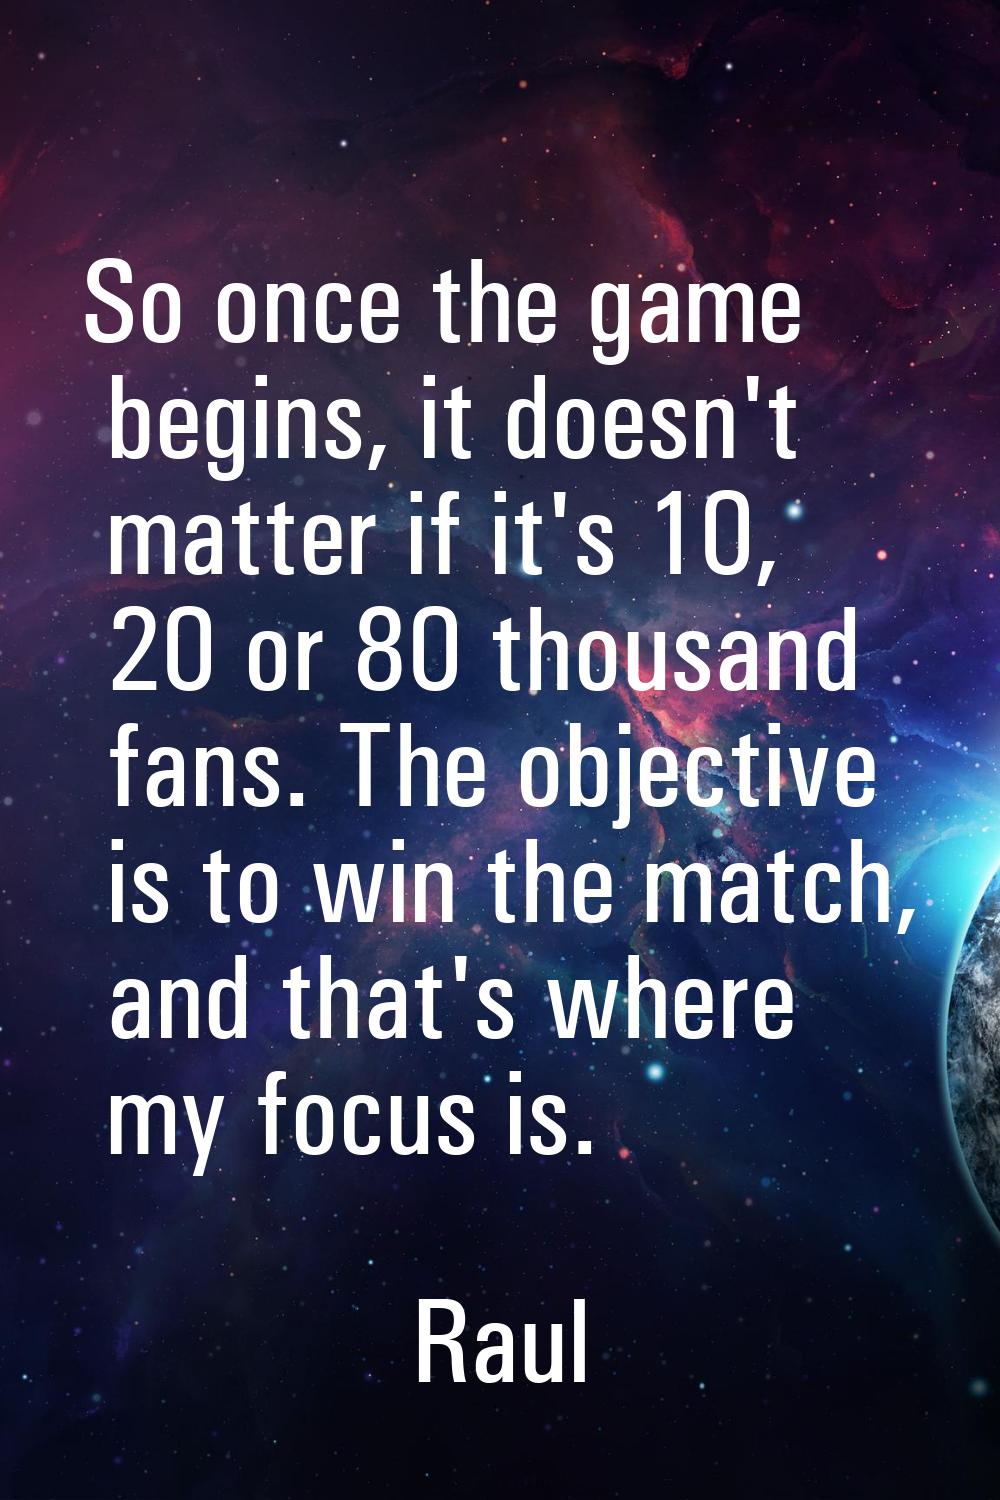 So once the game begins, it doesn't matter if it's 10, 20 or 80 thousand fans. The objective is to 